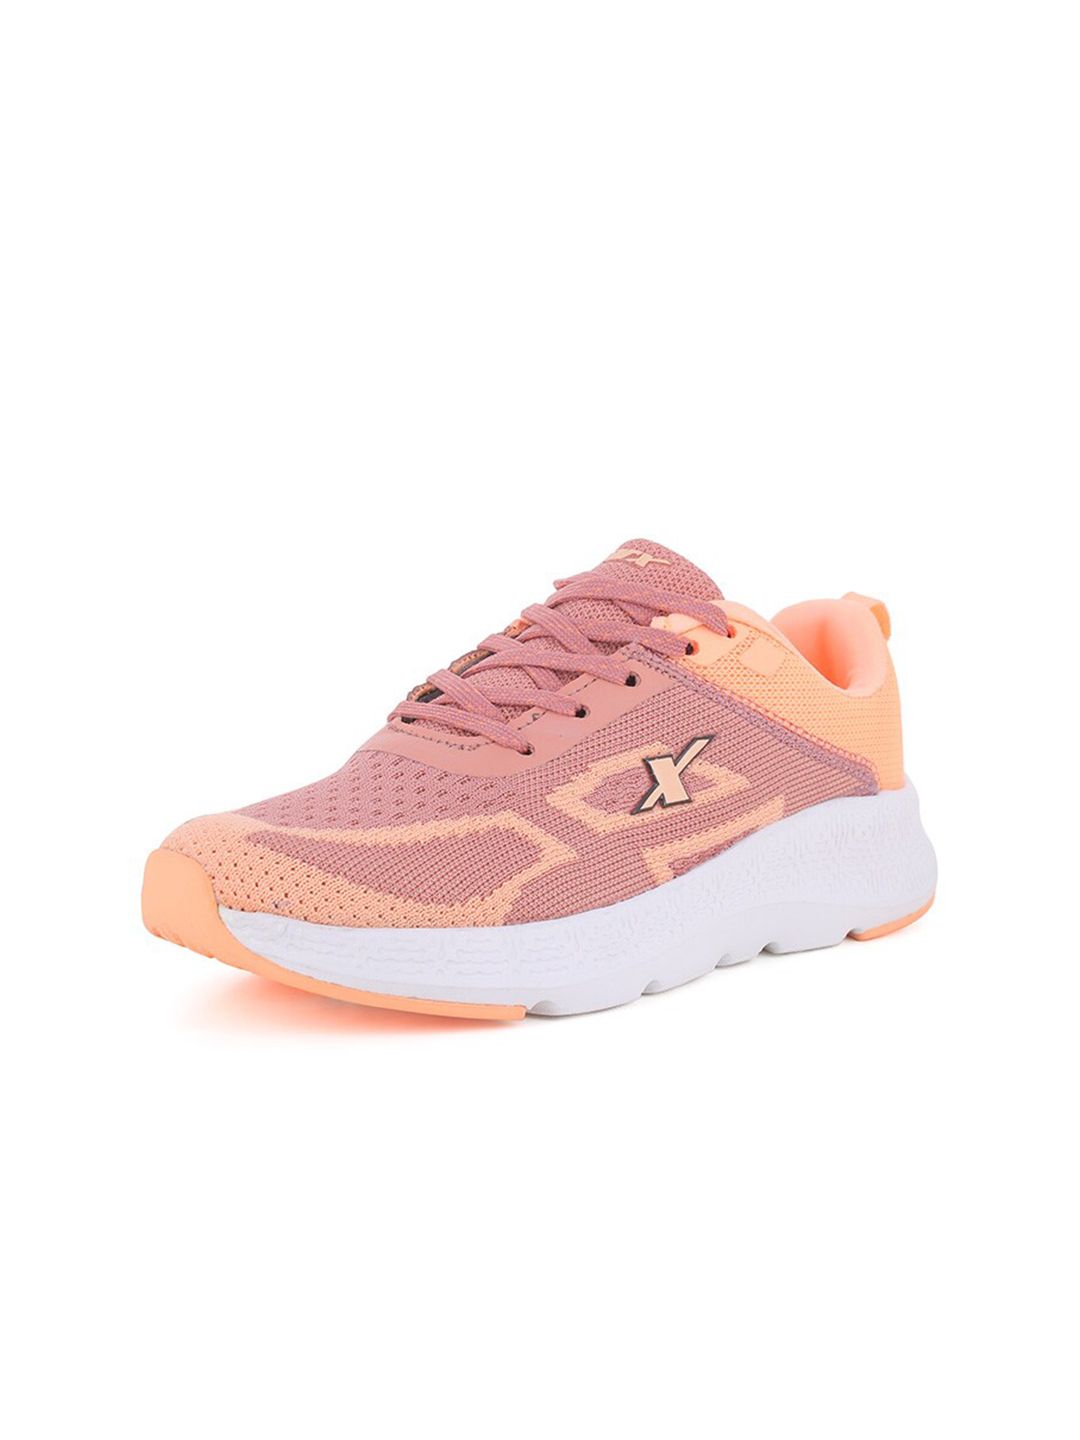 Sparx Women Pink Textile Running Non-Marking Shoes Price in India